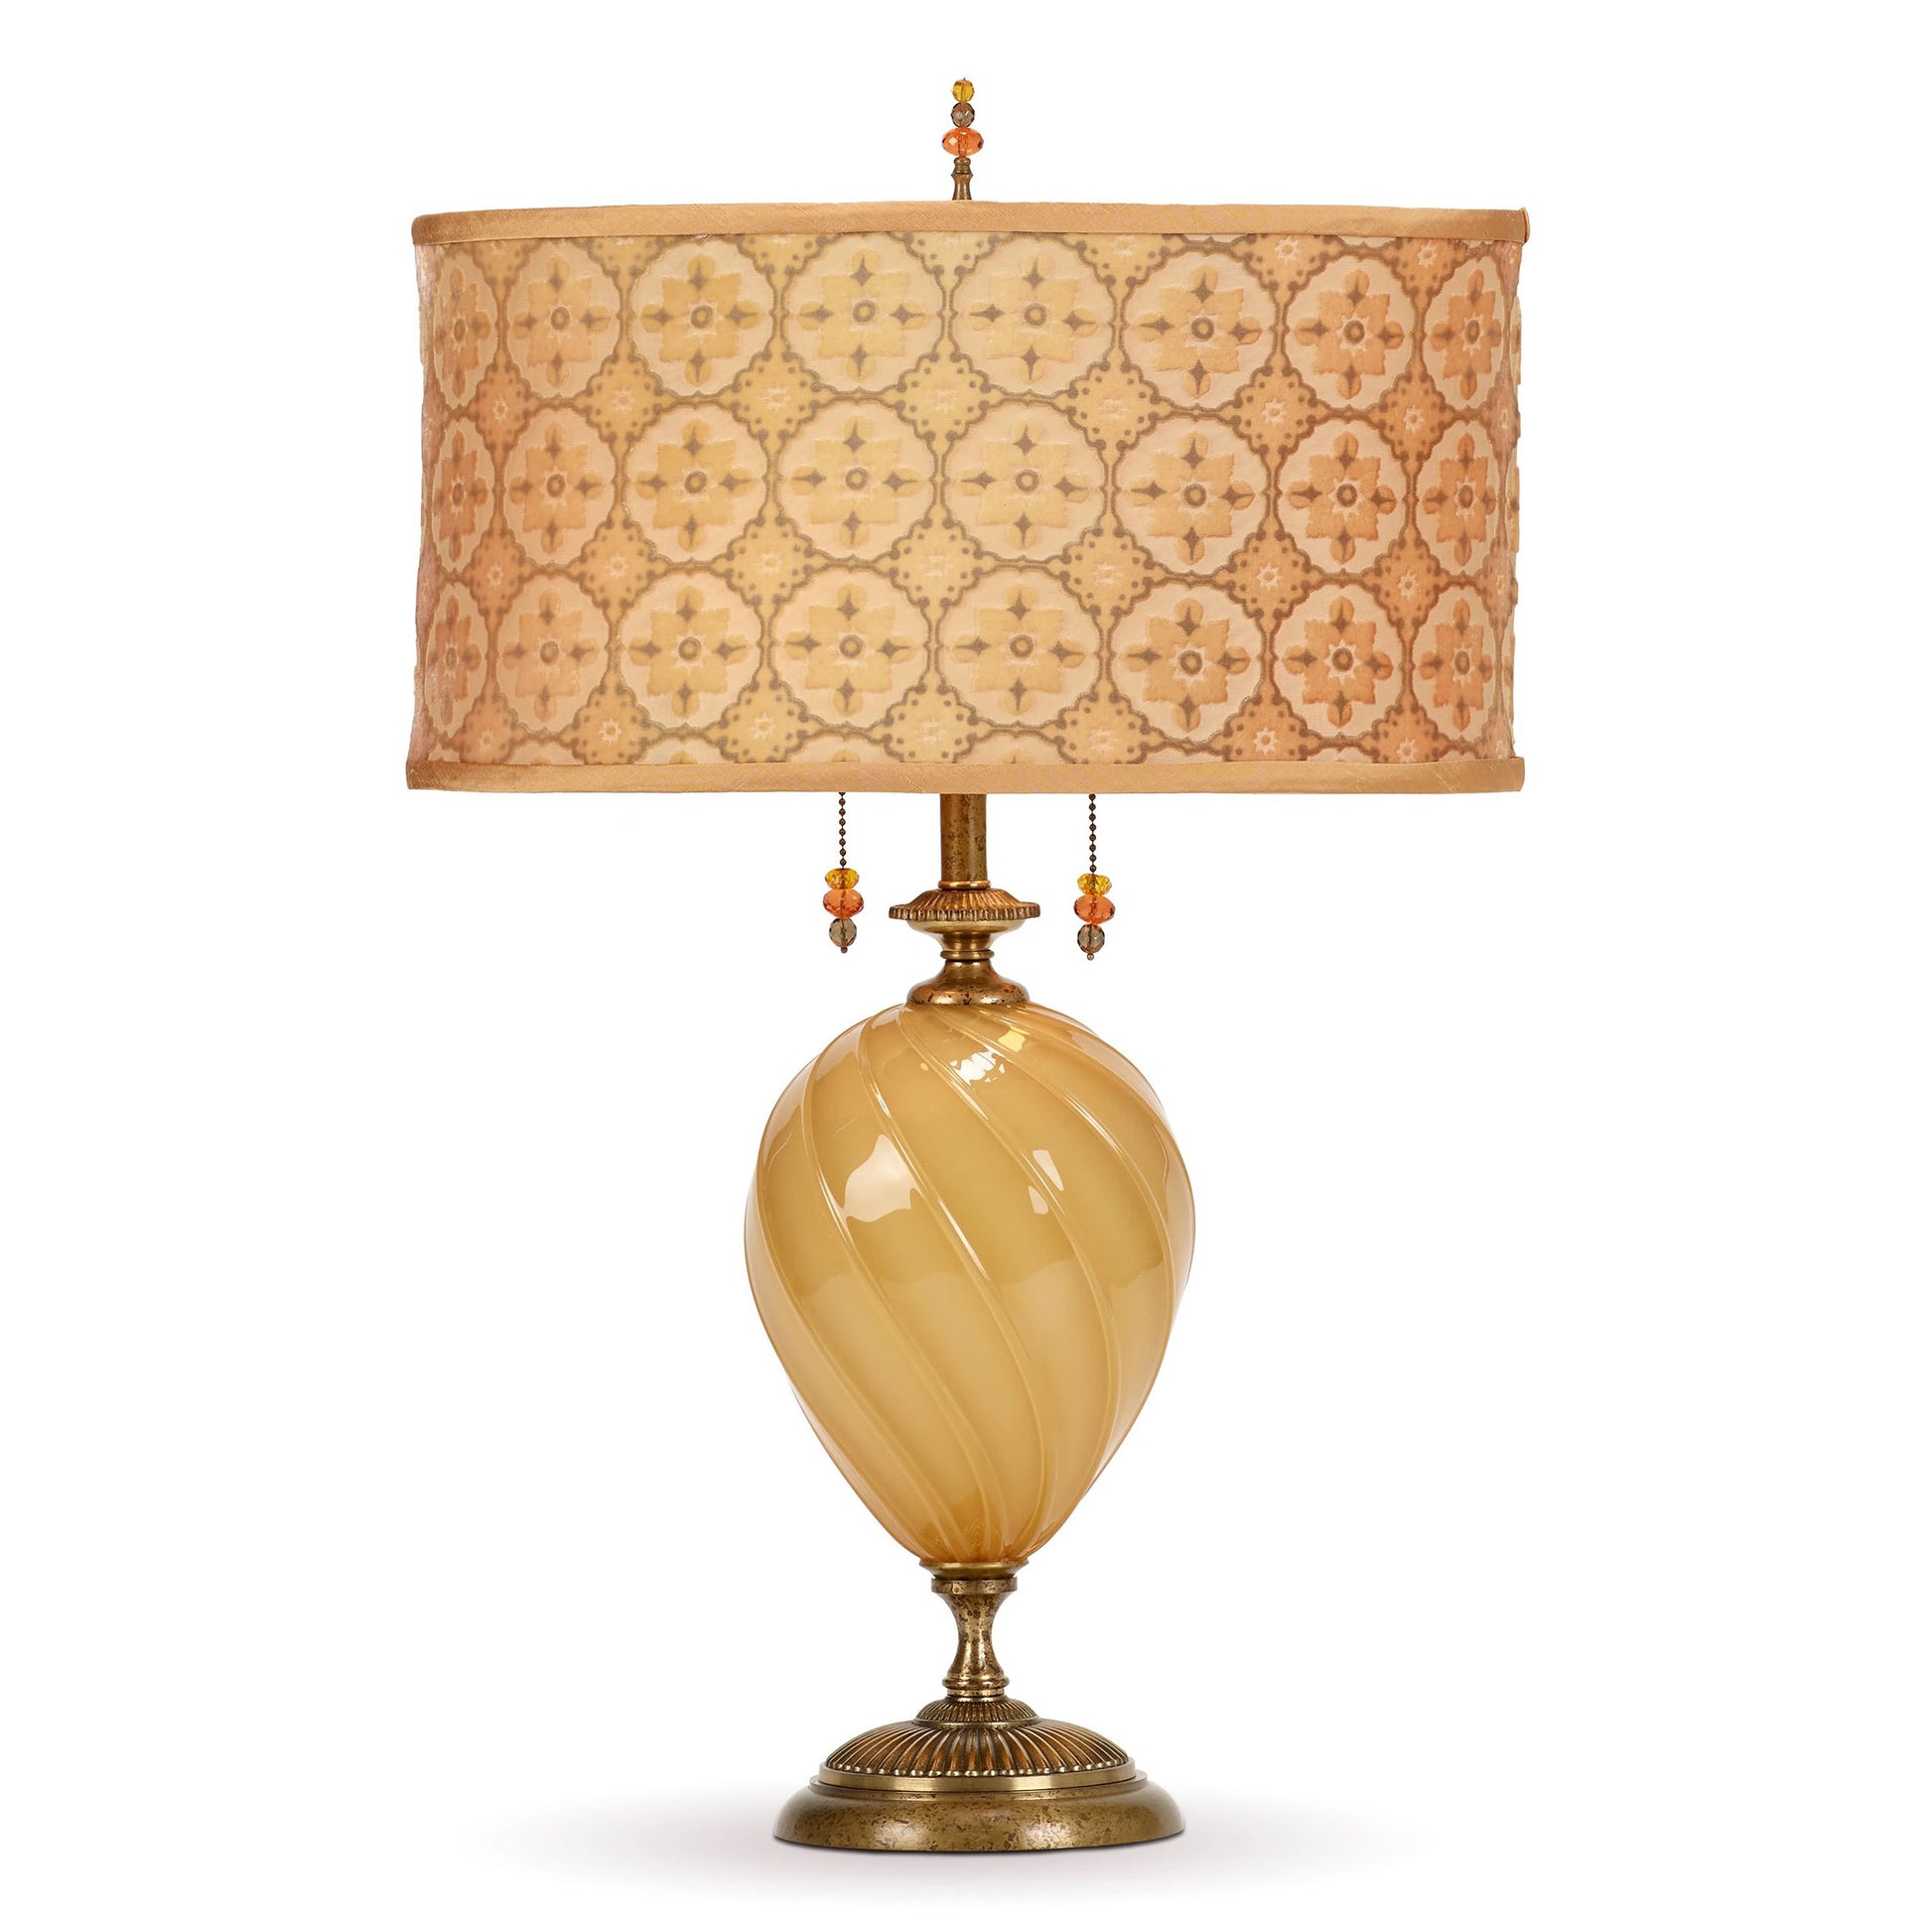 mixed media table lamp gold tone blown glass silk velvet shade hand painted moroccan pattern